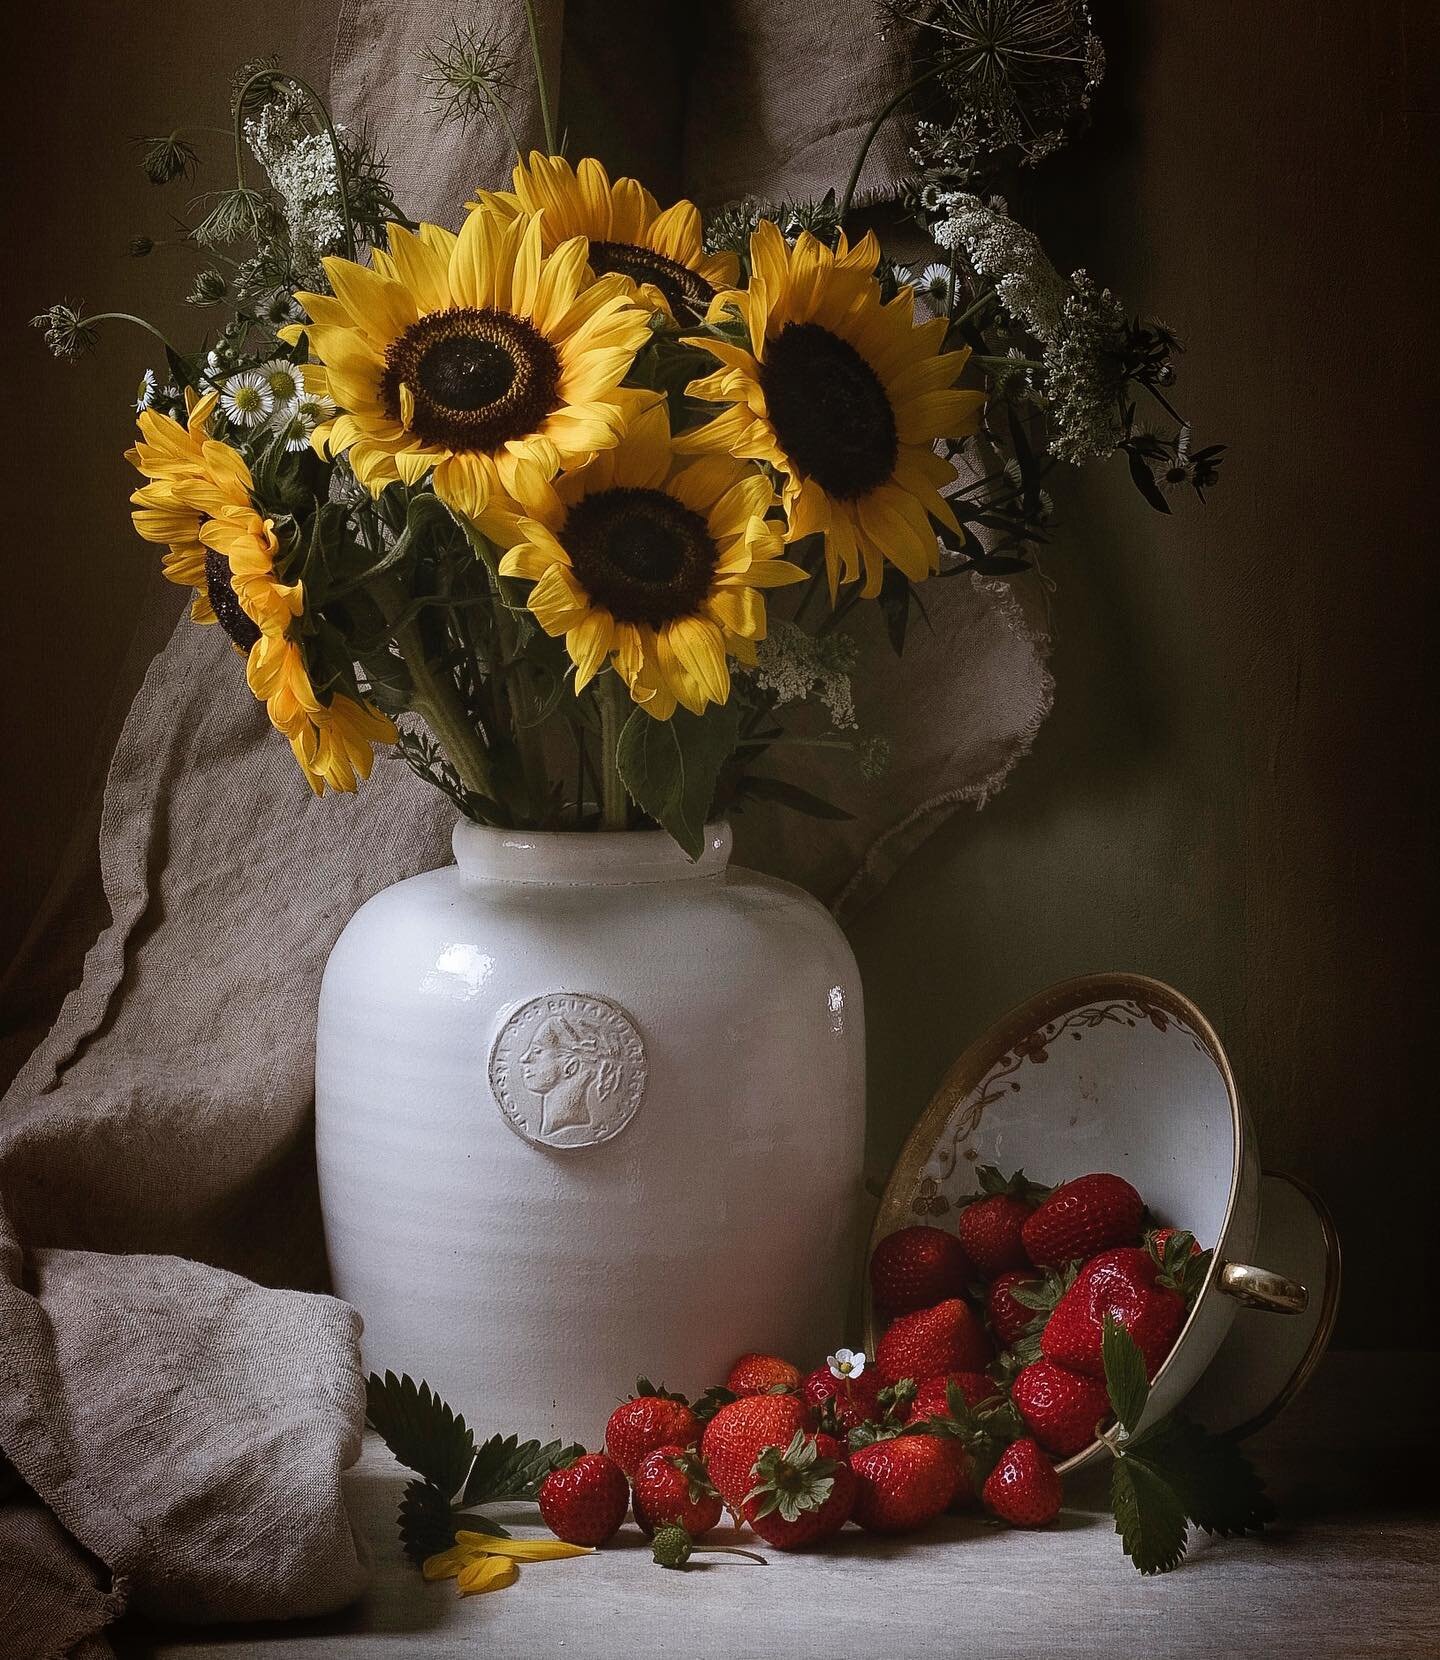 Sunflowers, Queen Anne&rsquo;s lace  and strawberries 🍓🌻

#stilllifephotography #stilllife_perfection #stilllifegallery #chiaroscuro #rembrandtlighting #newwork #smallartist #rustictable